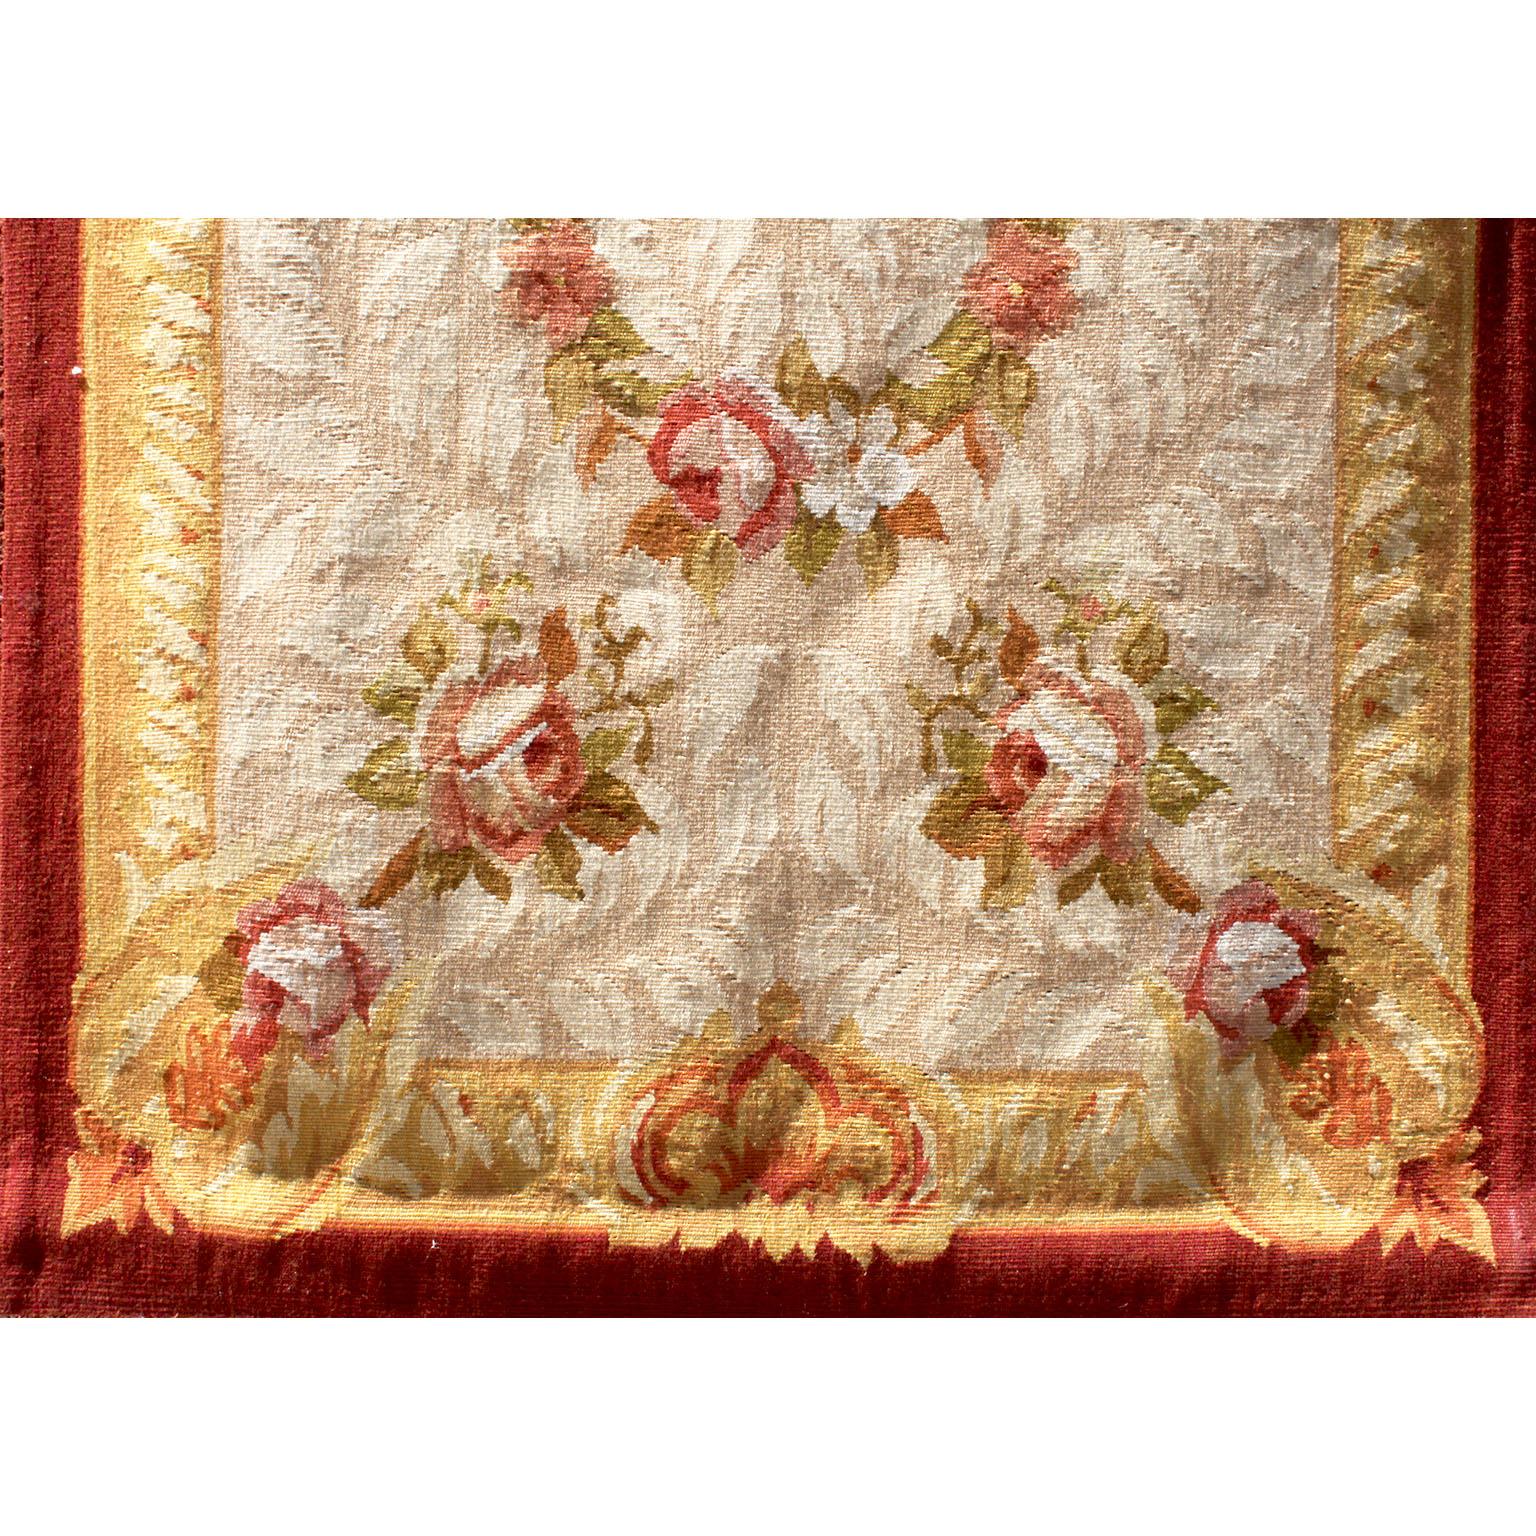 French 19th Century Louis XV Style Aubusson Tapestry Panel with Rose Bouquets For Sale 2